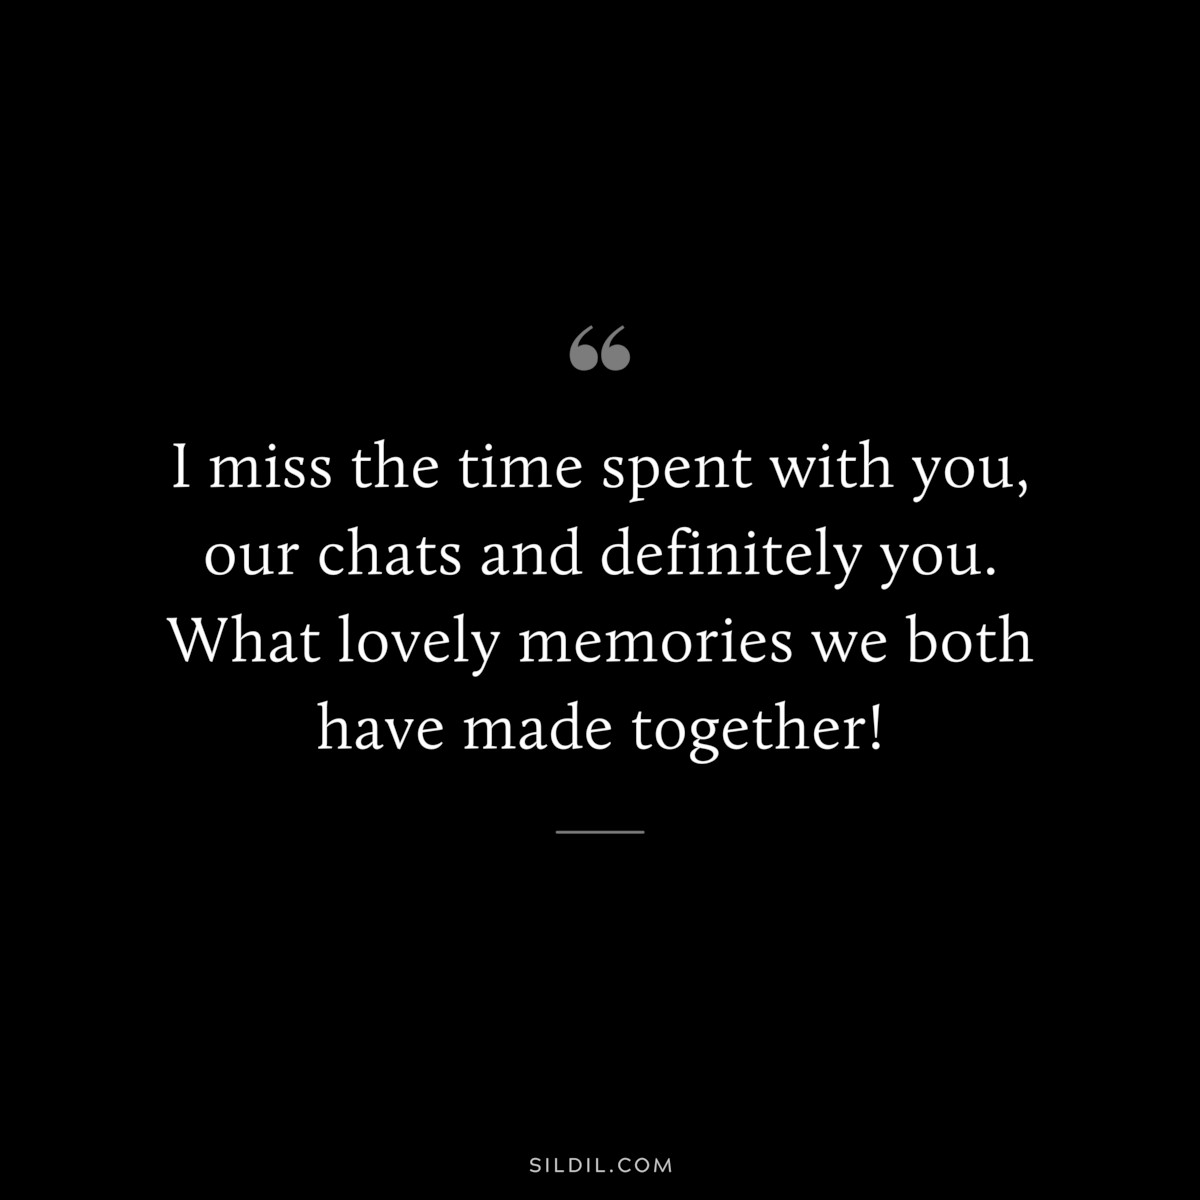 I miss the time spent with you, our chats and definitely you. What lovely memories we both have made together!